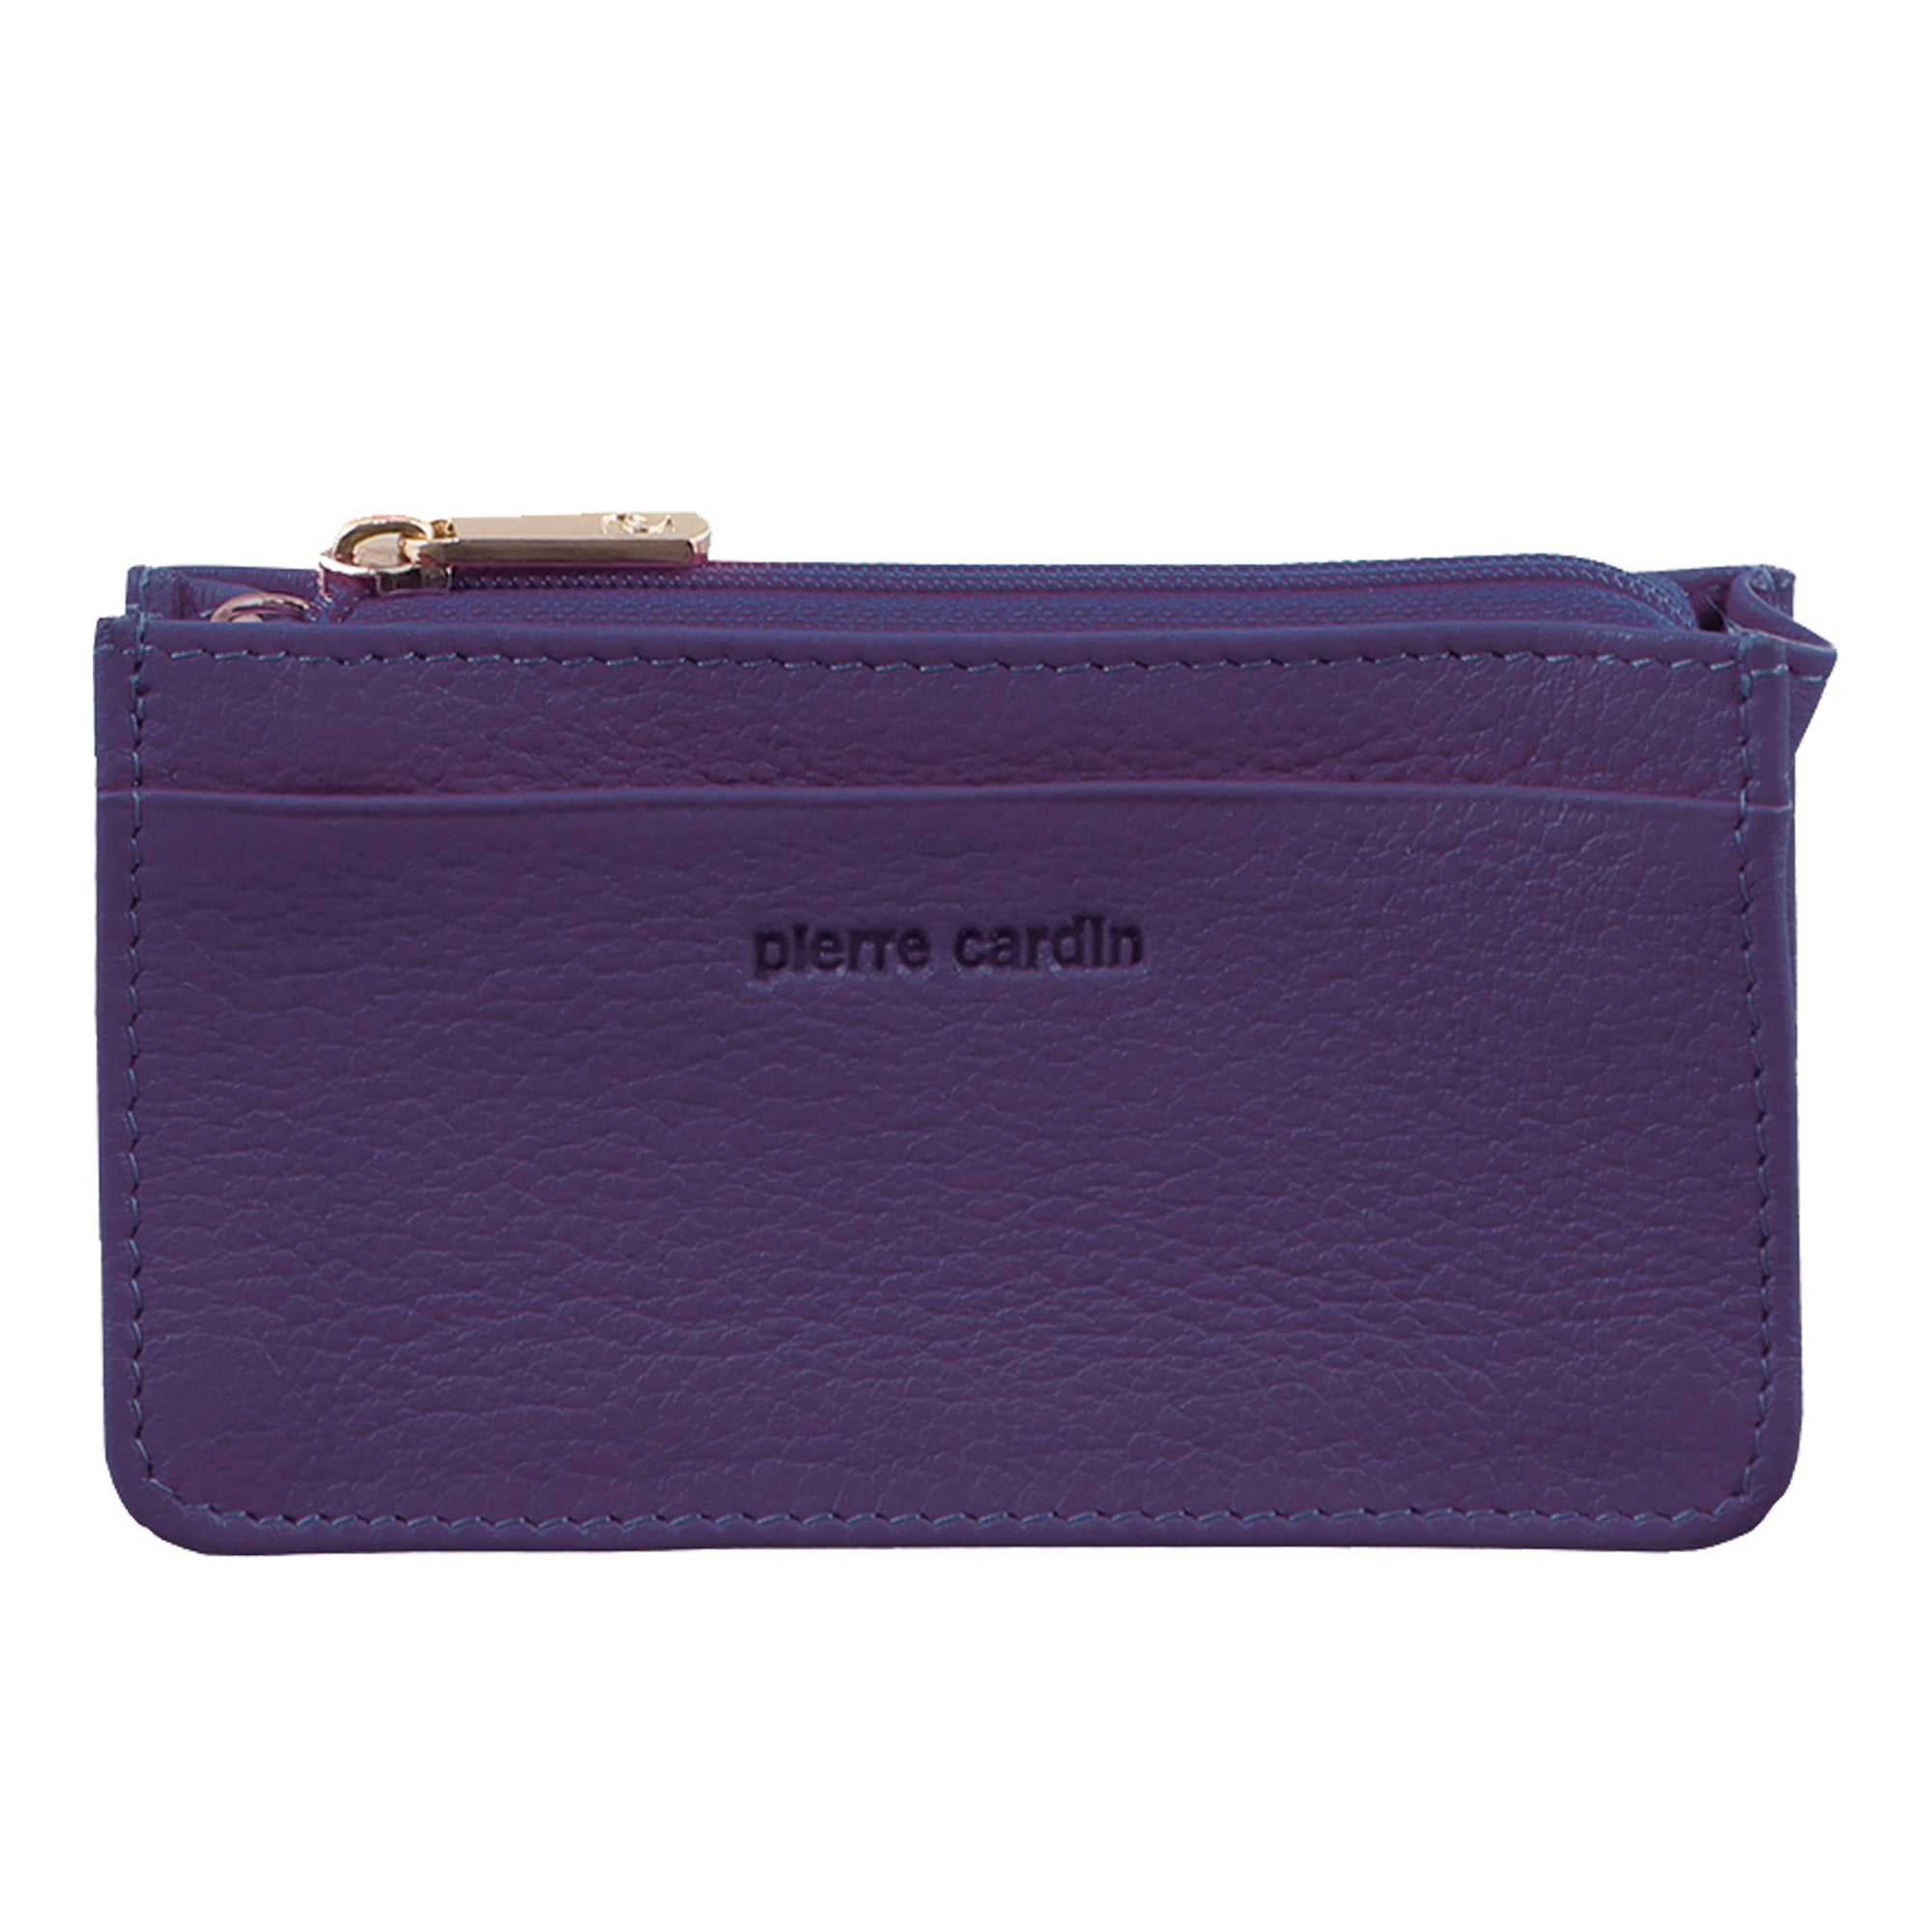 Pierre Cardin Coin Purse with Keyring in Purple